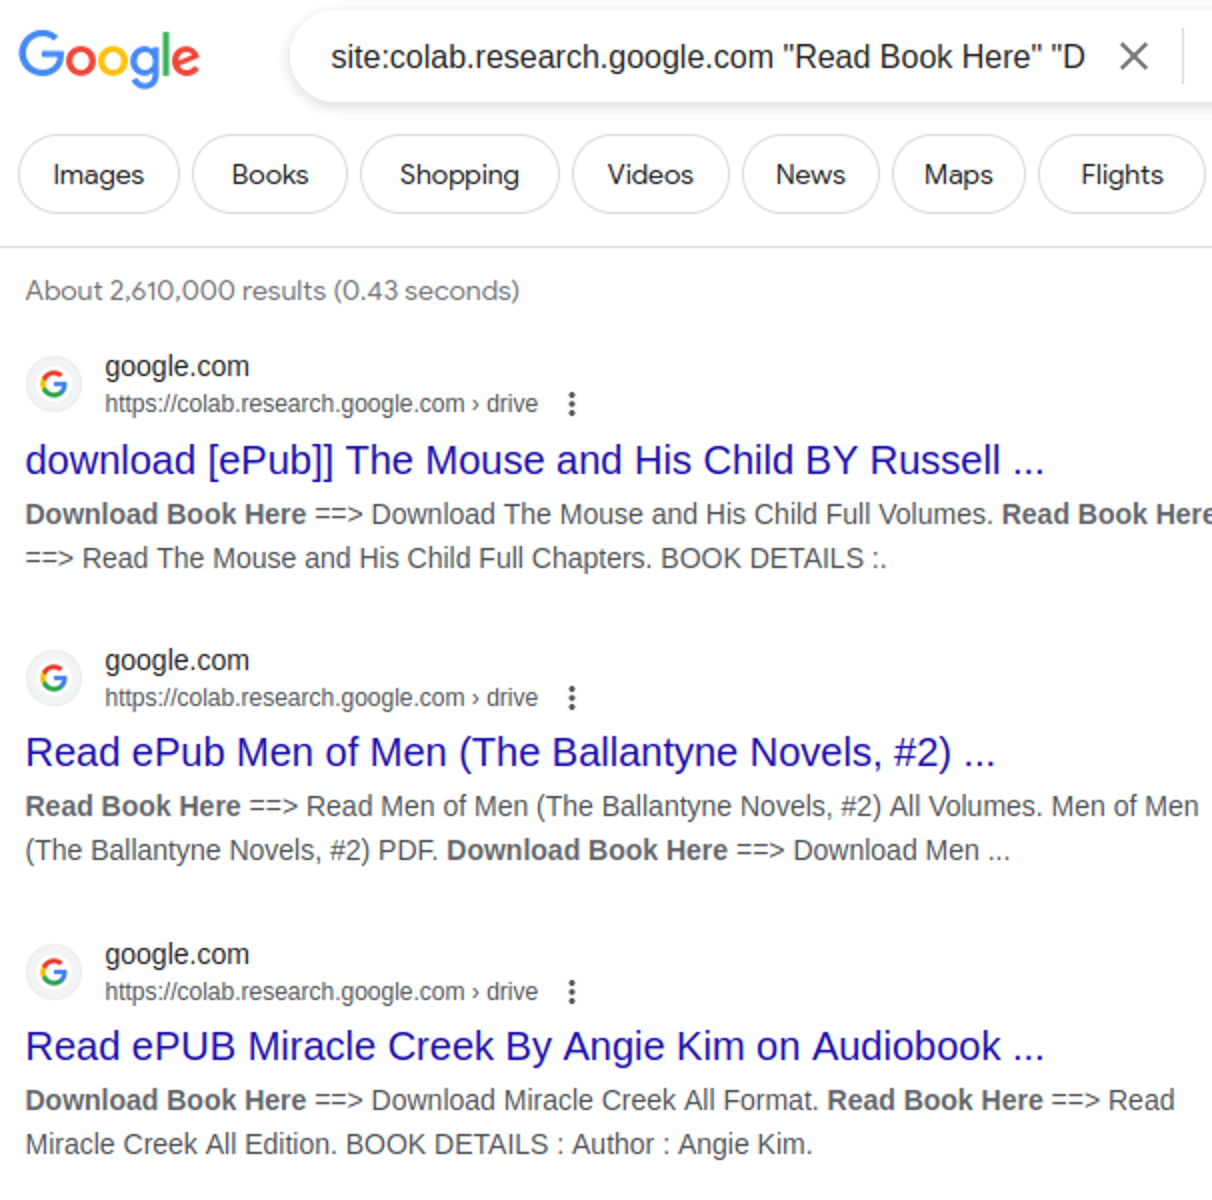 Spam from Google Colaboratory "Read Book Here" query returns over 2.6 million search results